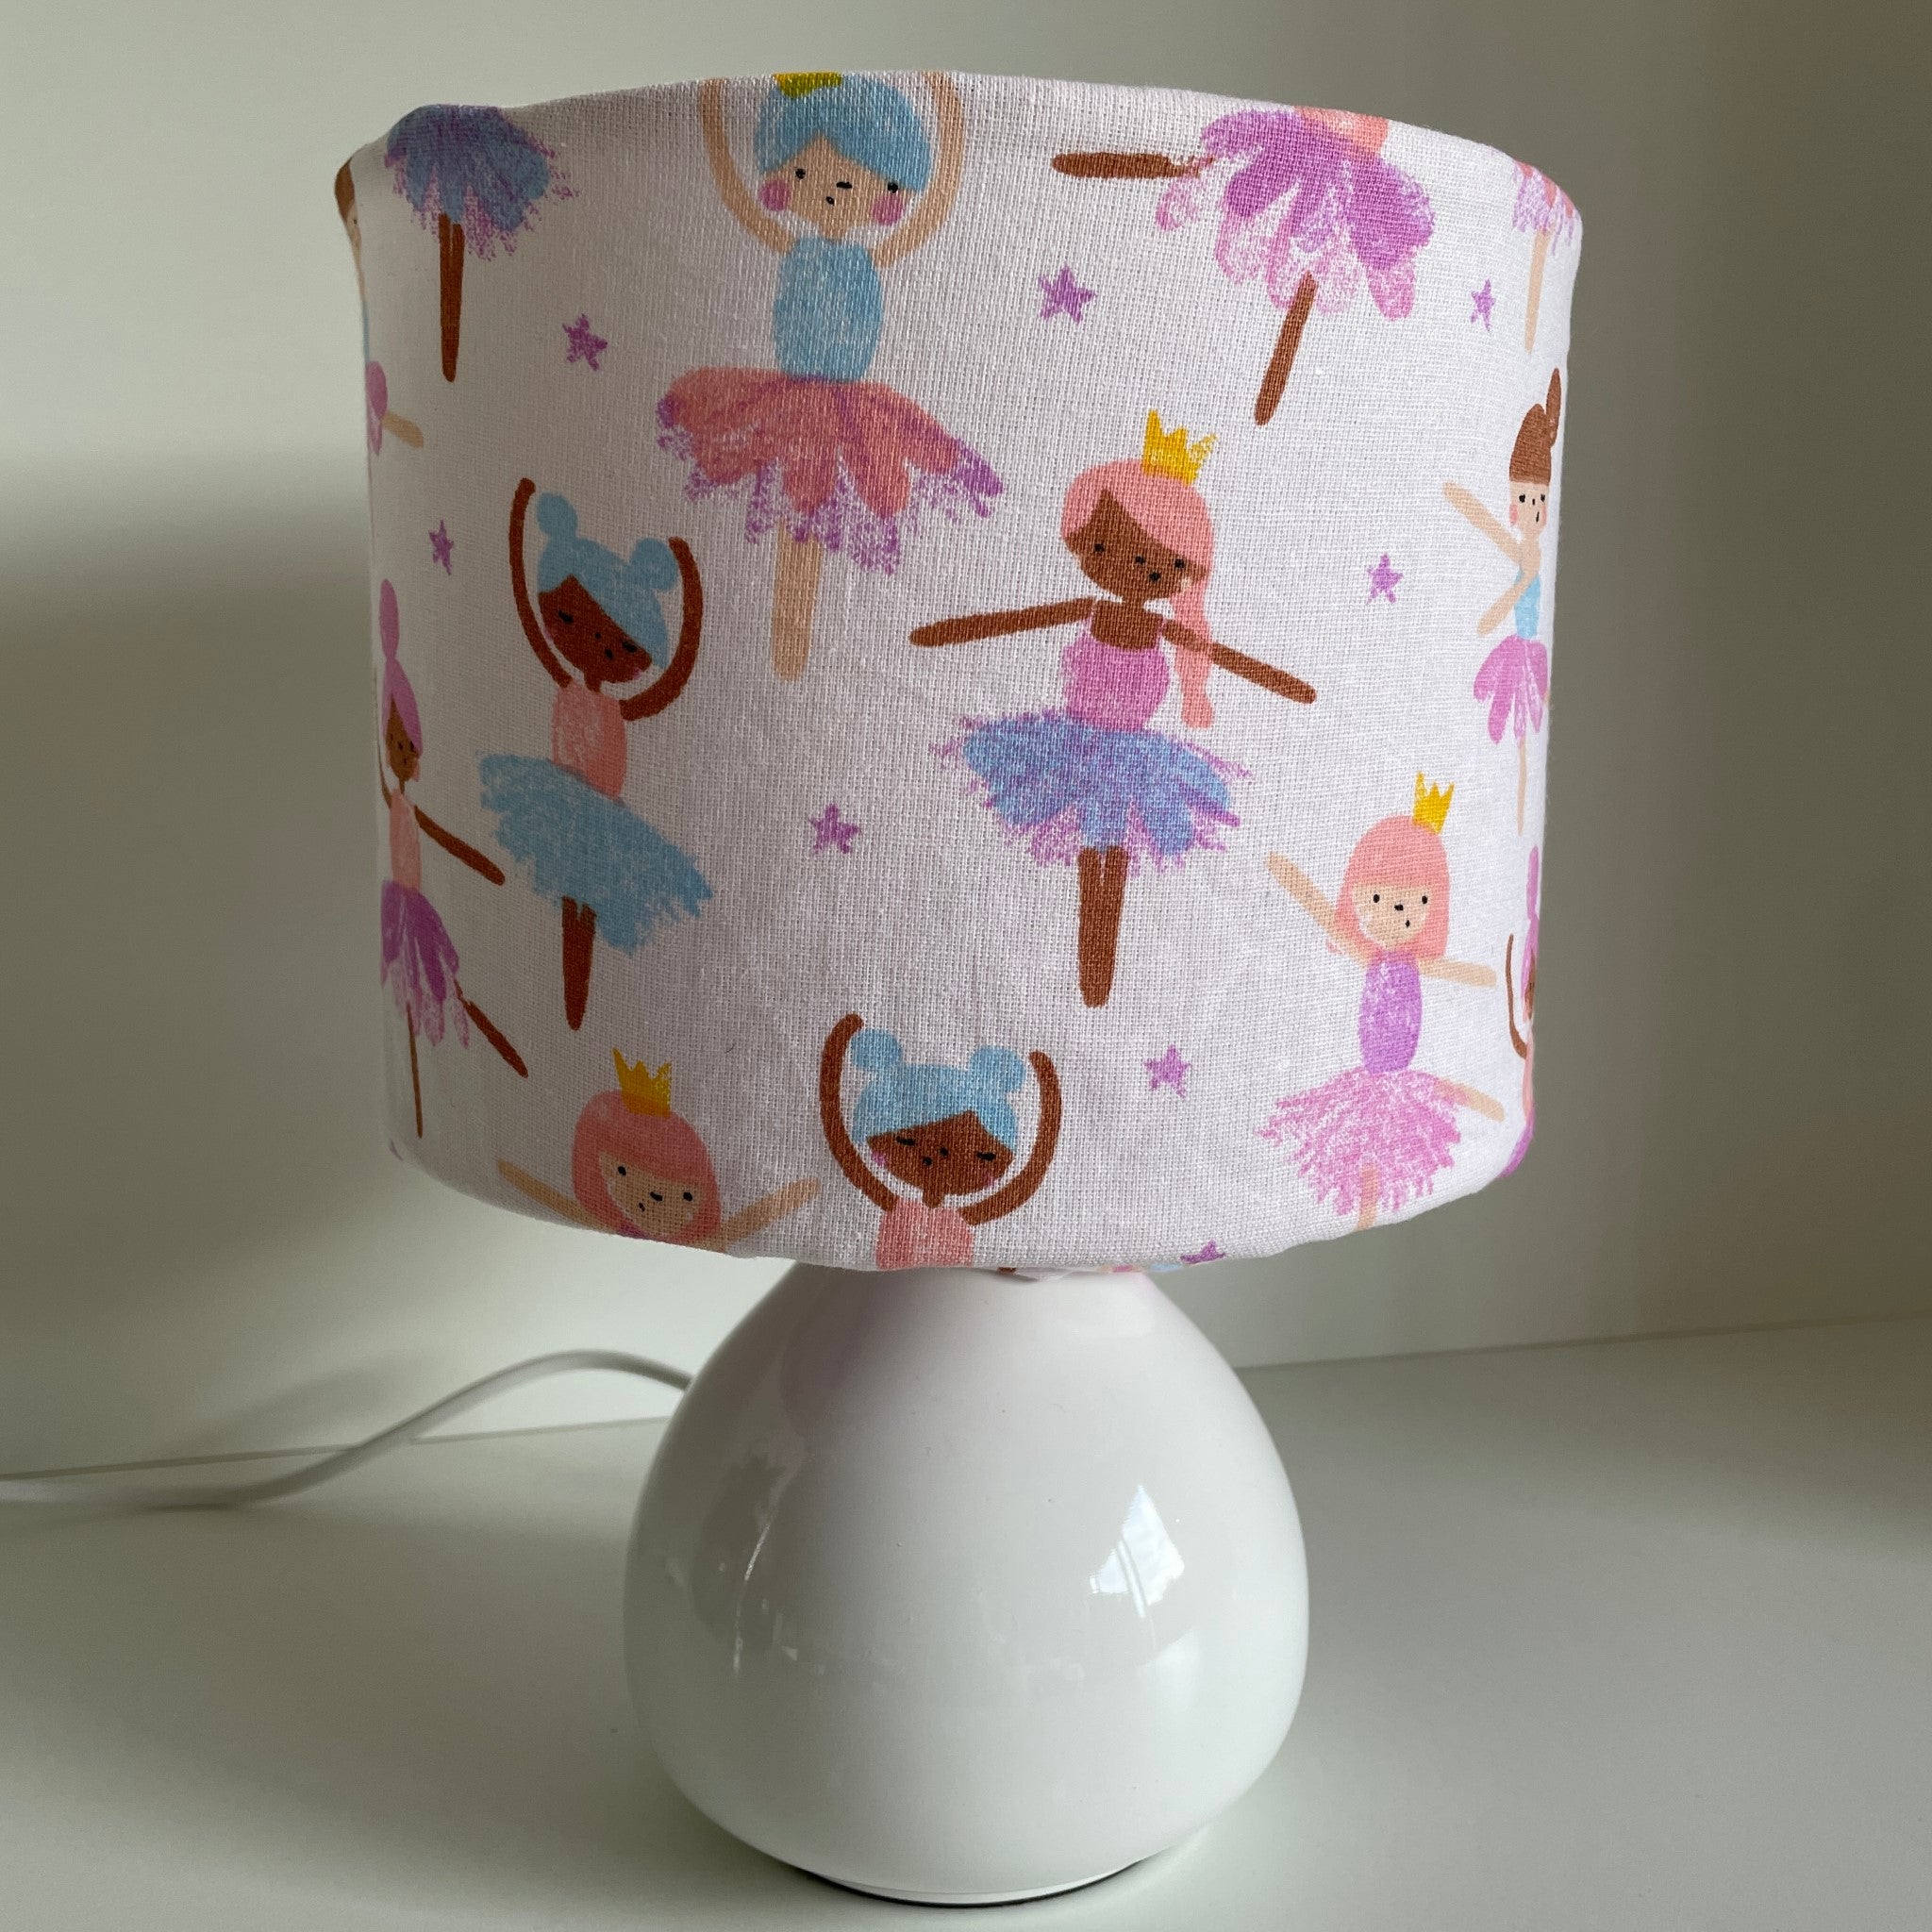 Young ballerina figures dance on a soft cream background, small fabric light shade on small white lamp base.